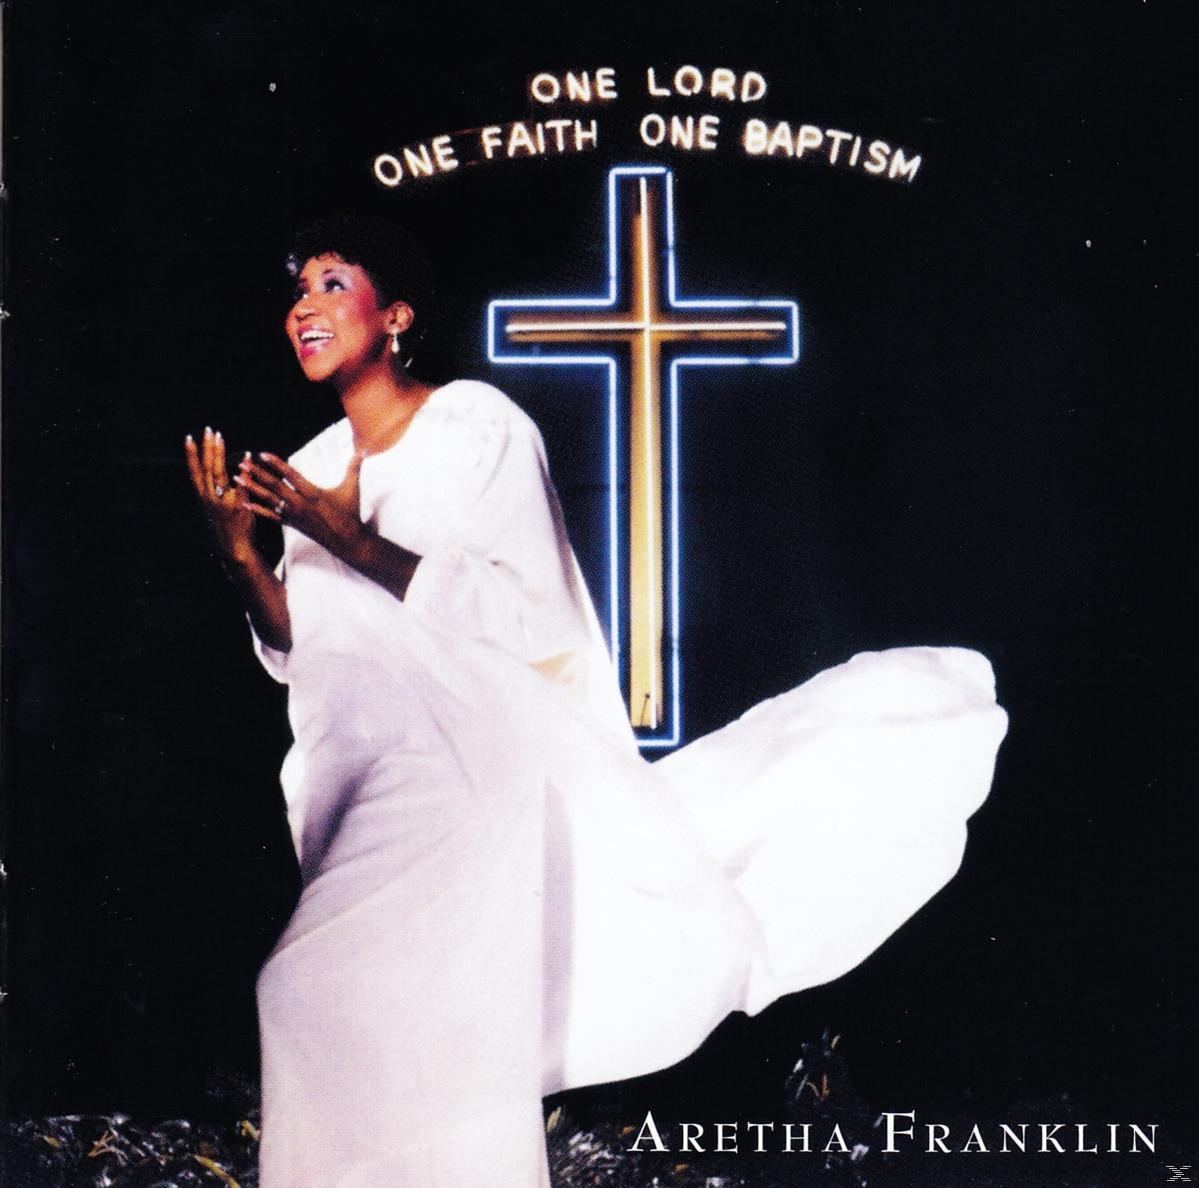 Faith,One - Aretha Franklin, Baptism One (CD) VARIOUS Lord,One -